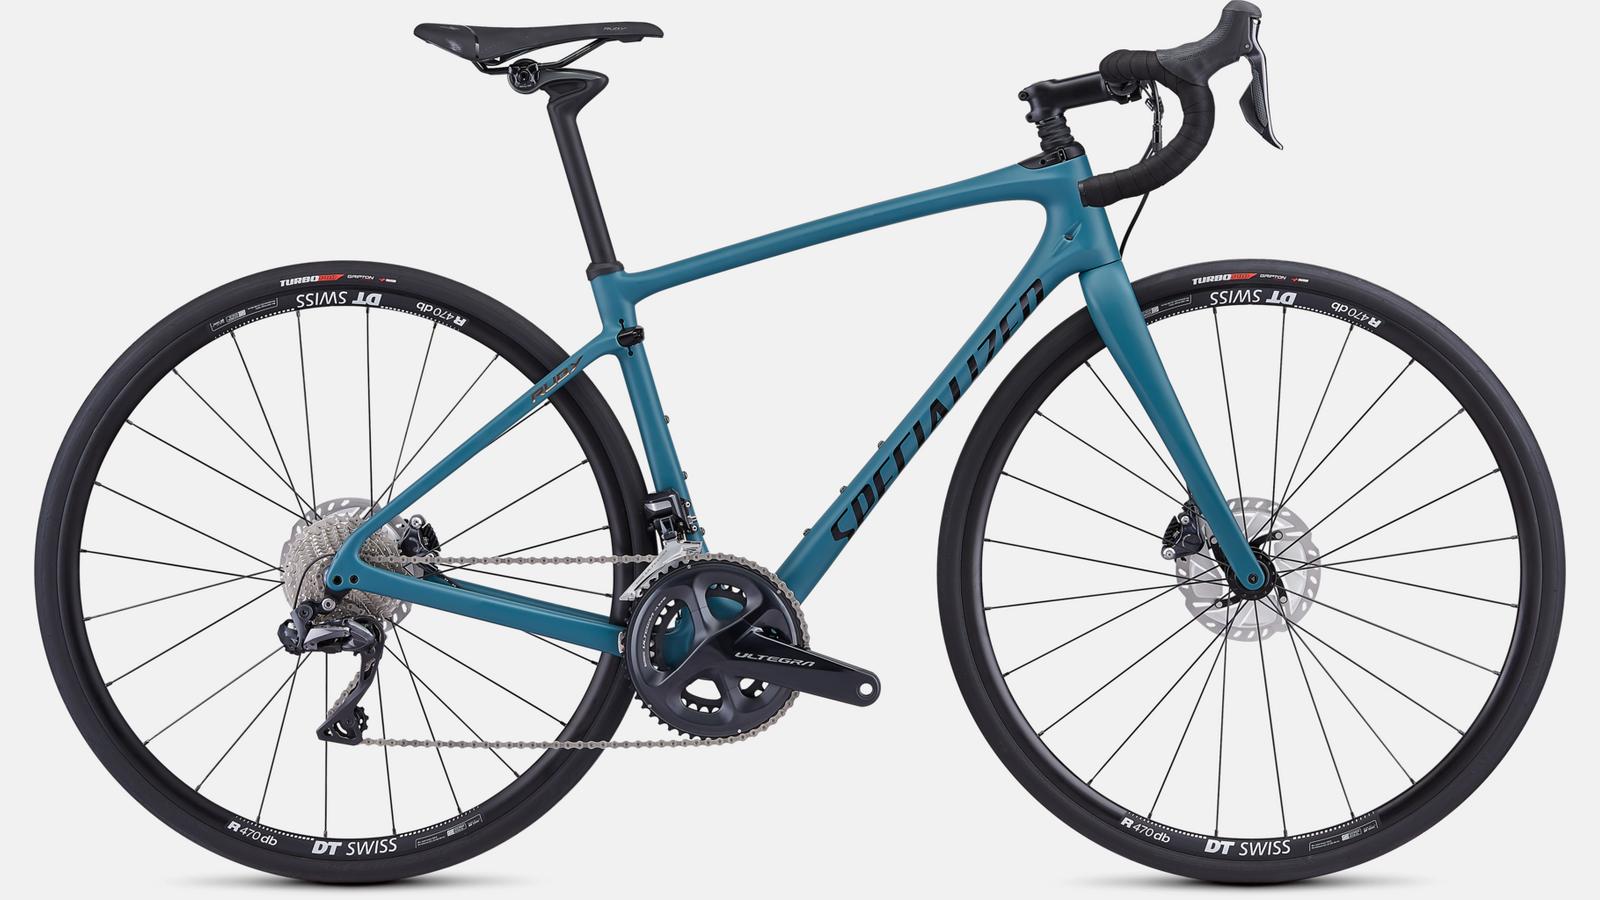 Paint for 2019 Specialized Ruby Comp – Ultegra Di2 - Satin Dusty Turquoise